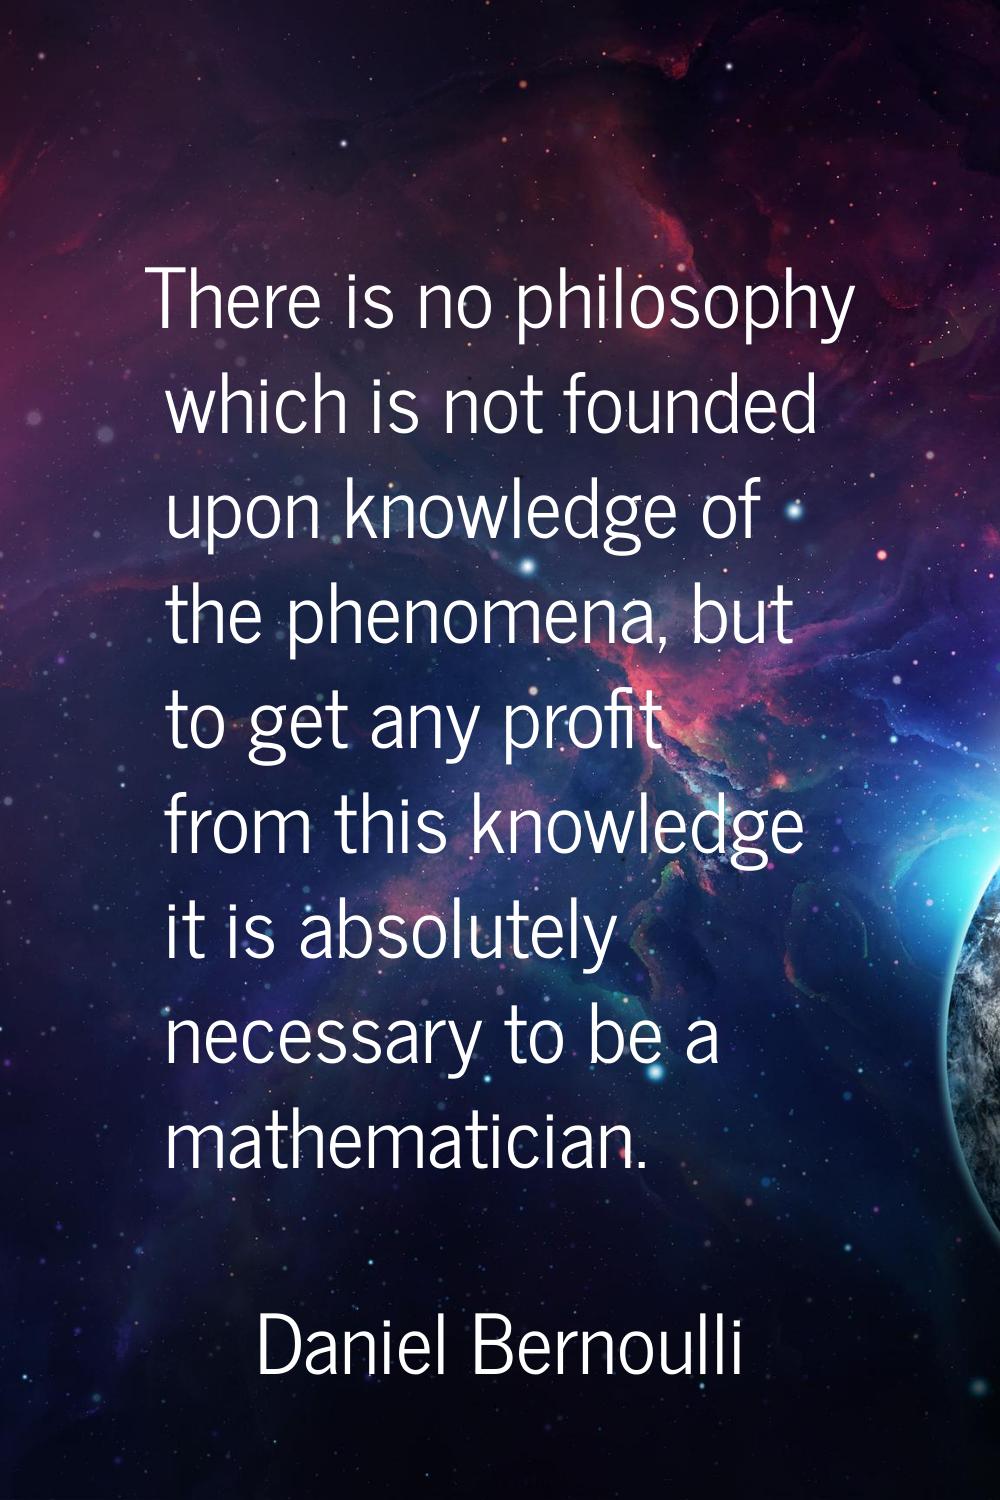 There is no philosophy which is not founded upon knowledge of the phenomena, but to get any profit 